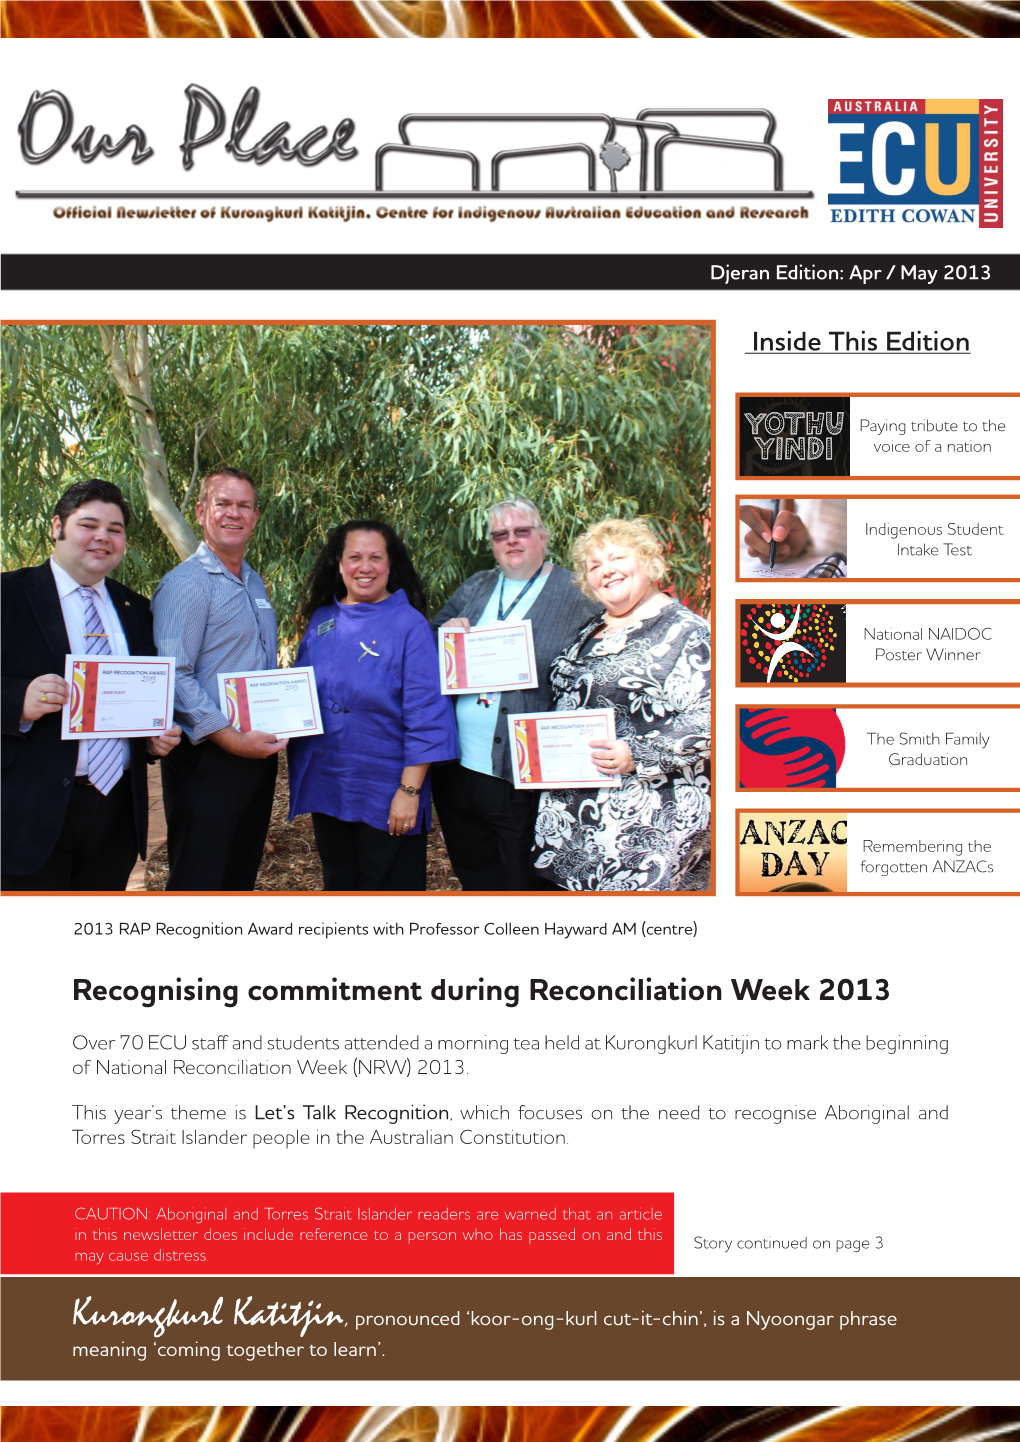 Recognising Commitment During Reconciliation Week 2013